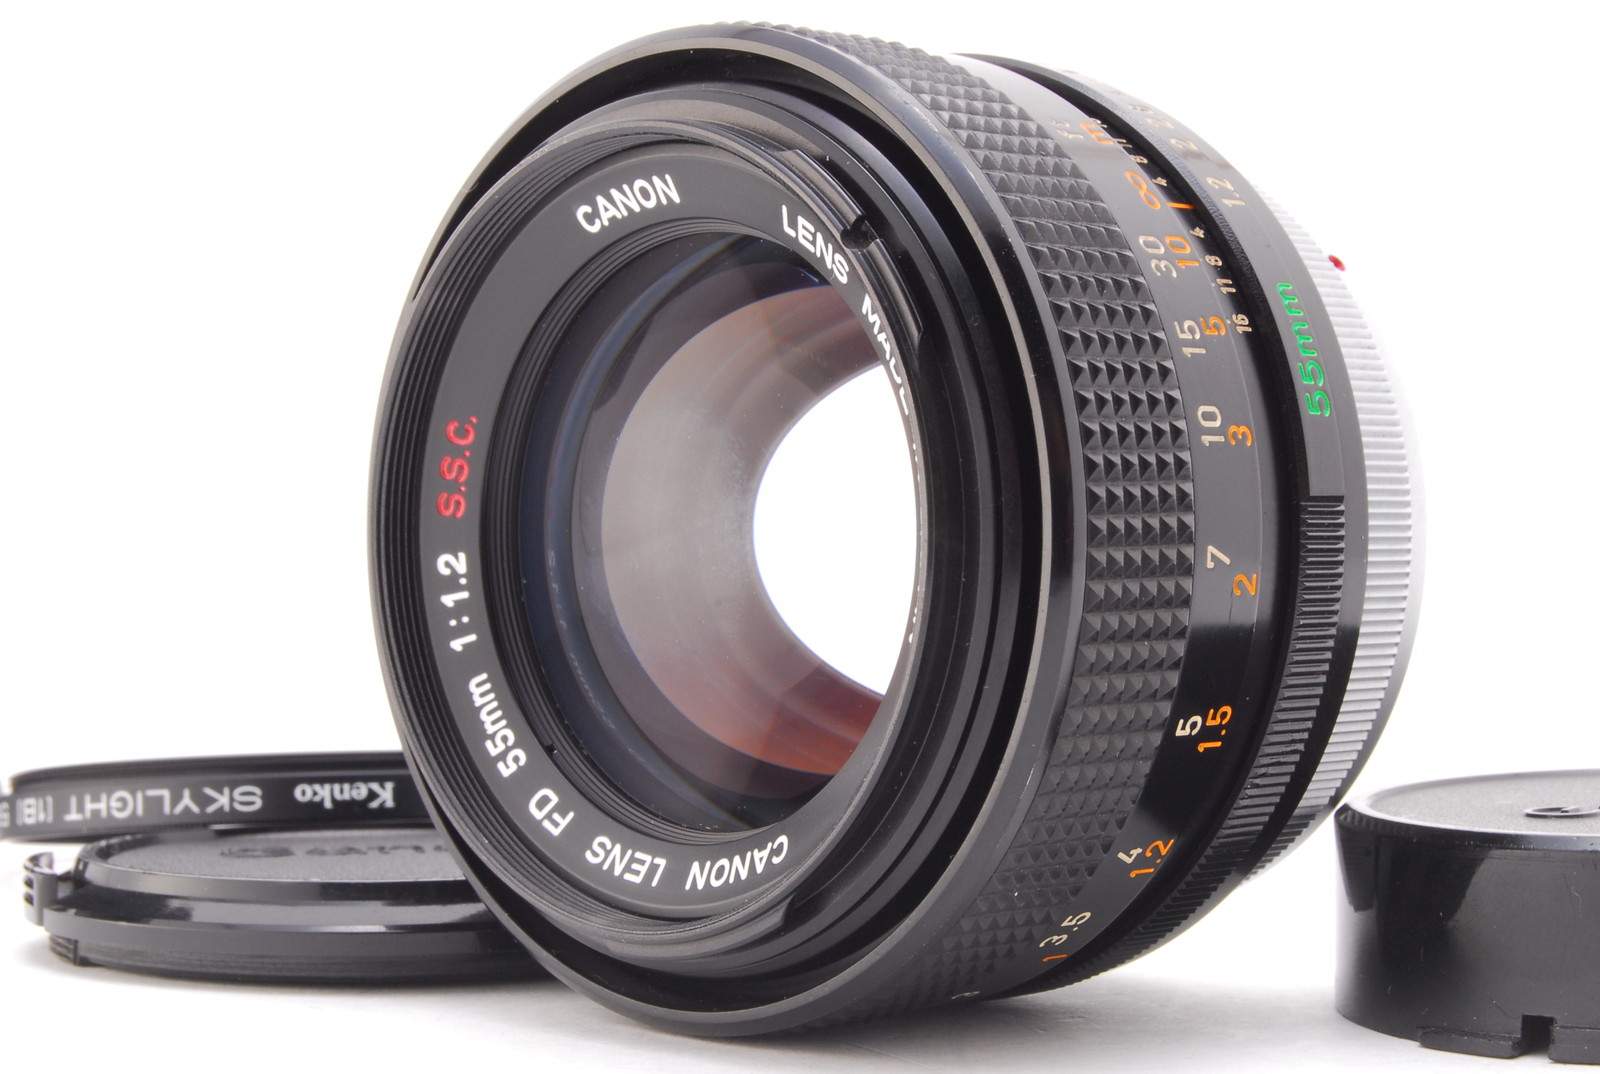 PROMOTION.😊 EXC++++ Canon FD 55mm f/1.2 S.S.C. SSC Manual Lens from Japan